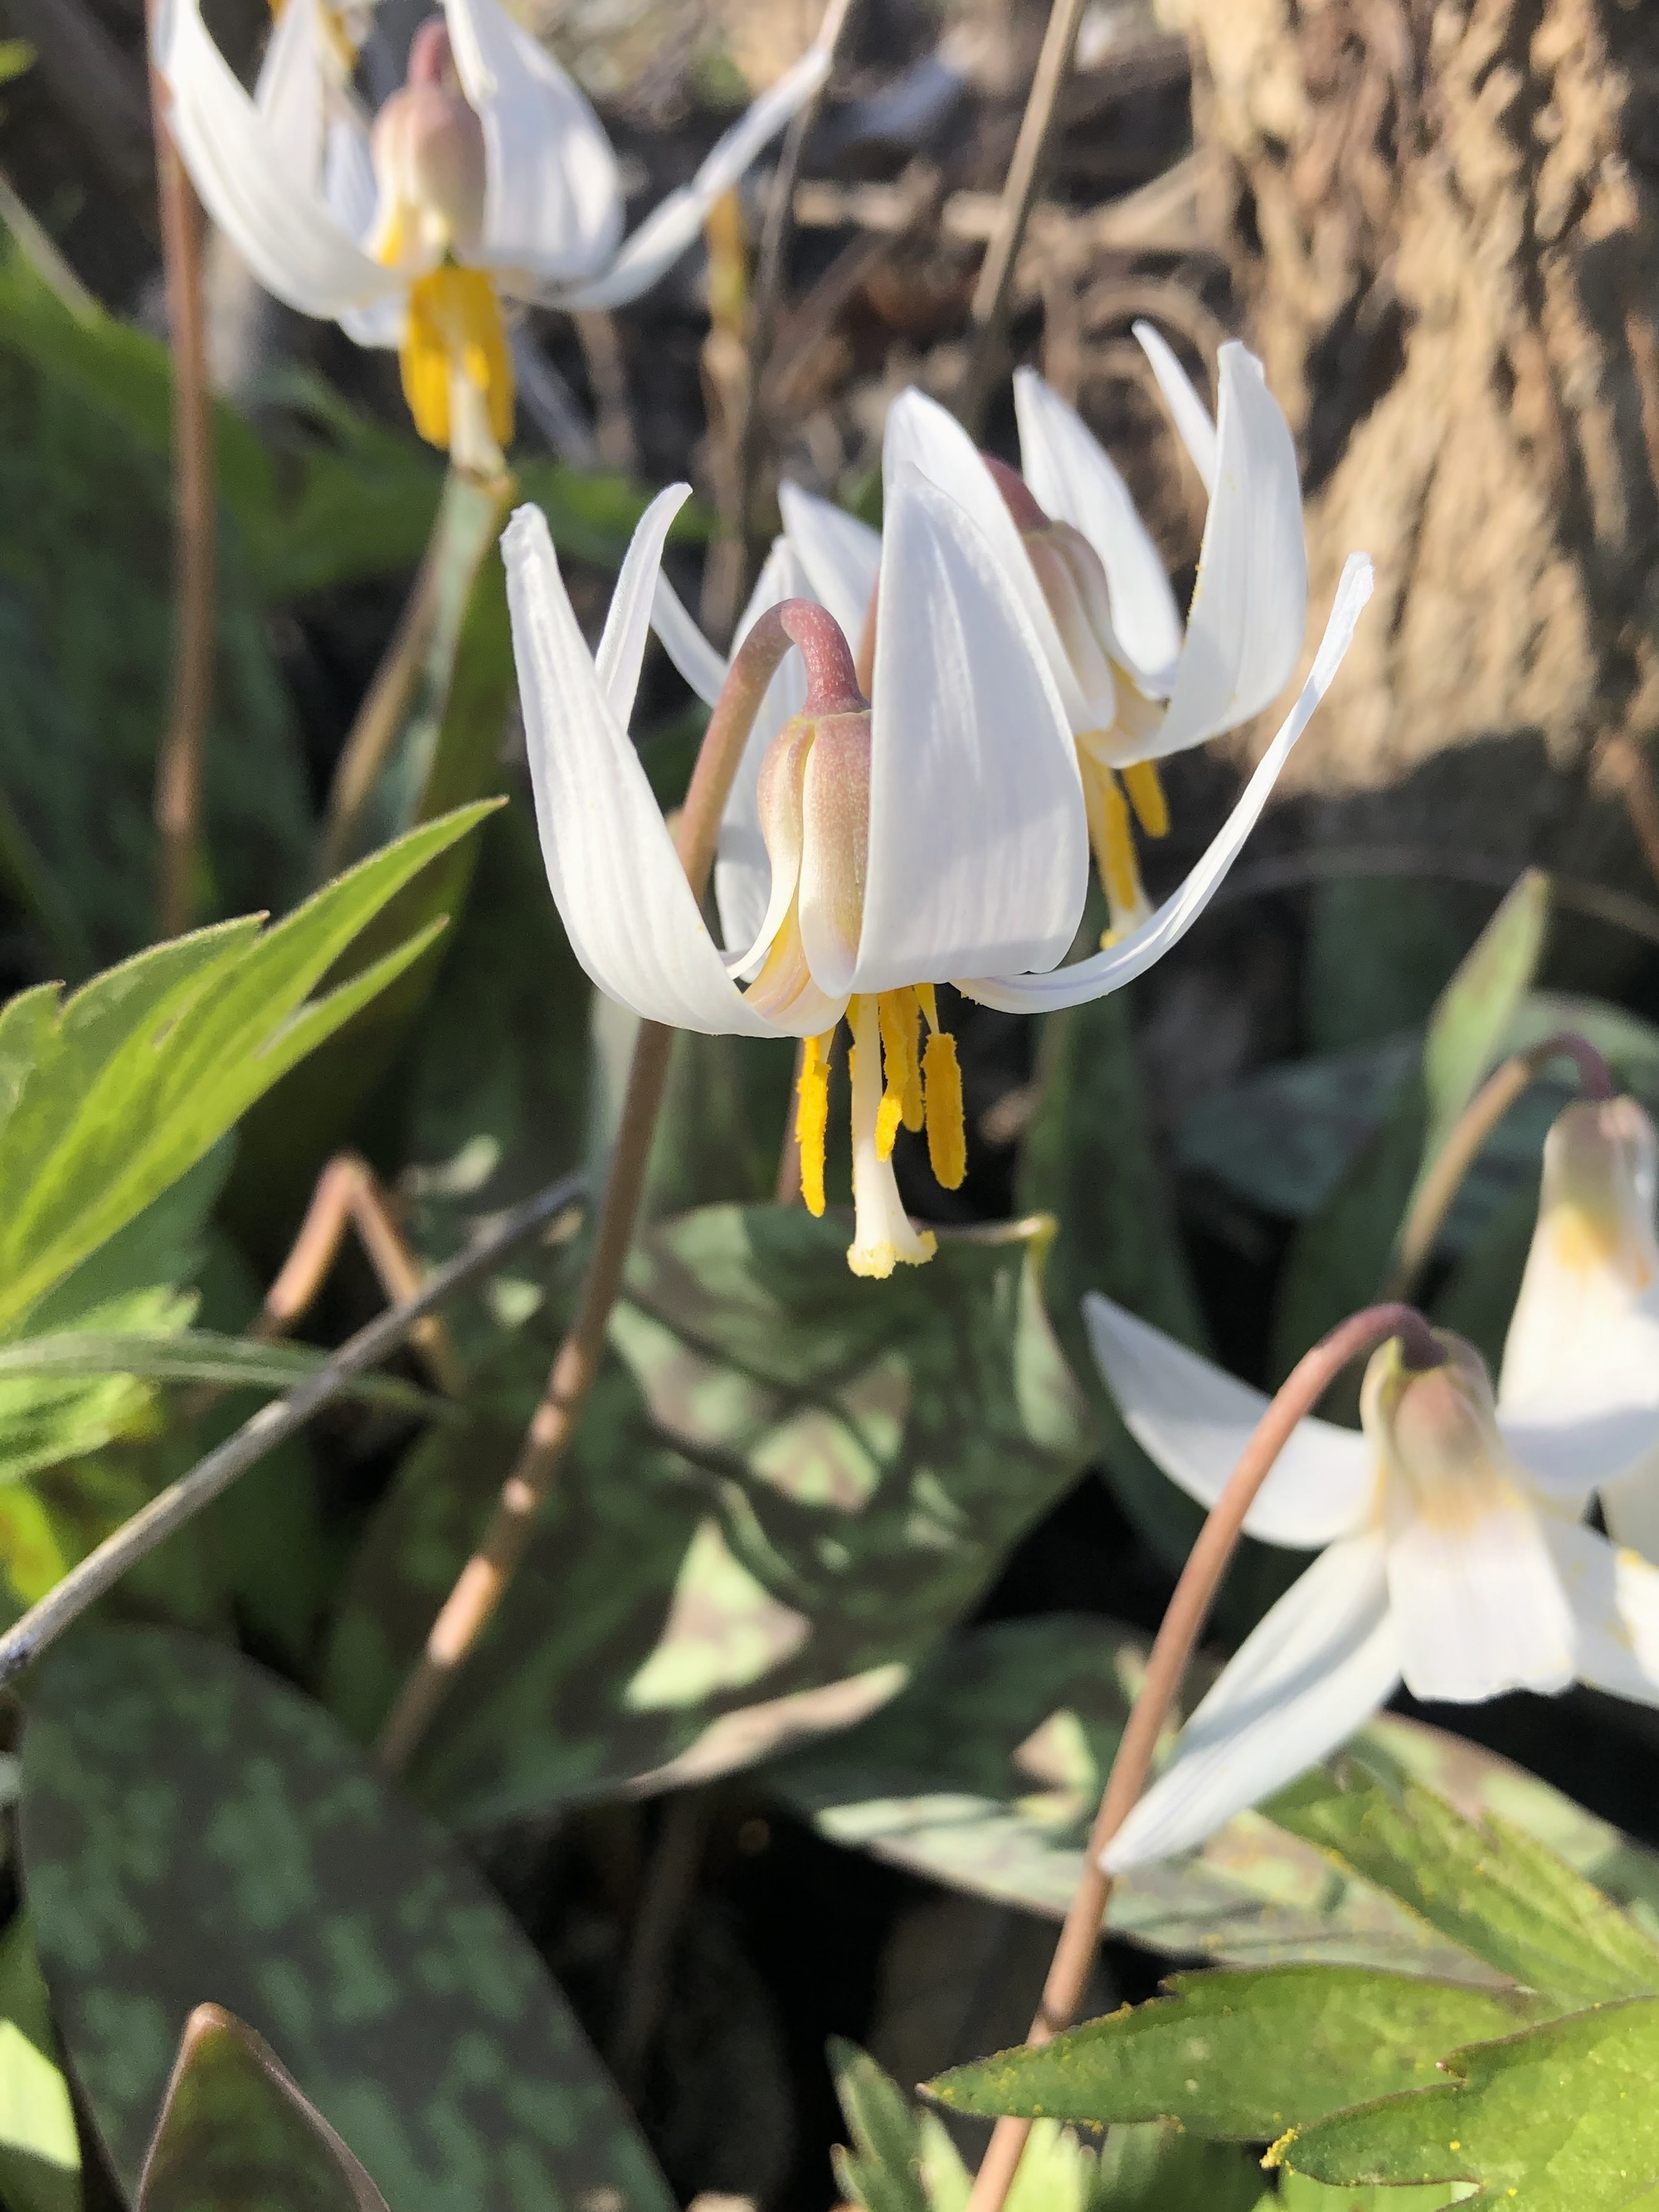 Trout Lily in Oak Savanna in Madison, Wisconsin on April 16, 2021.